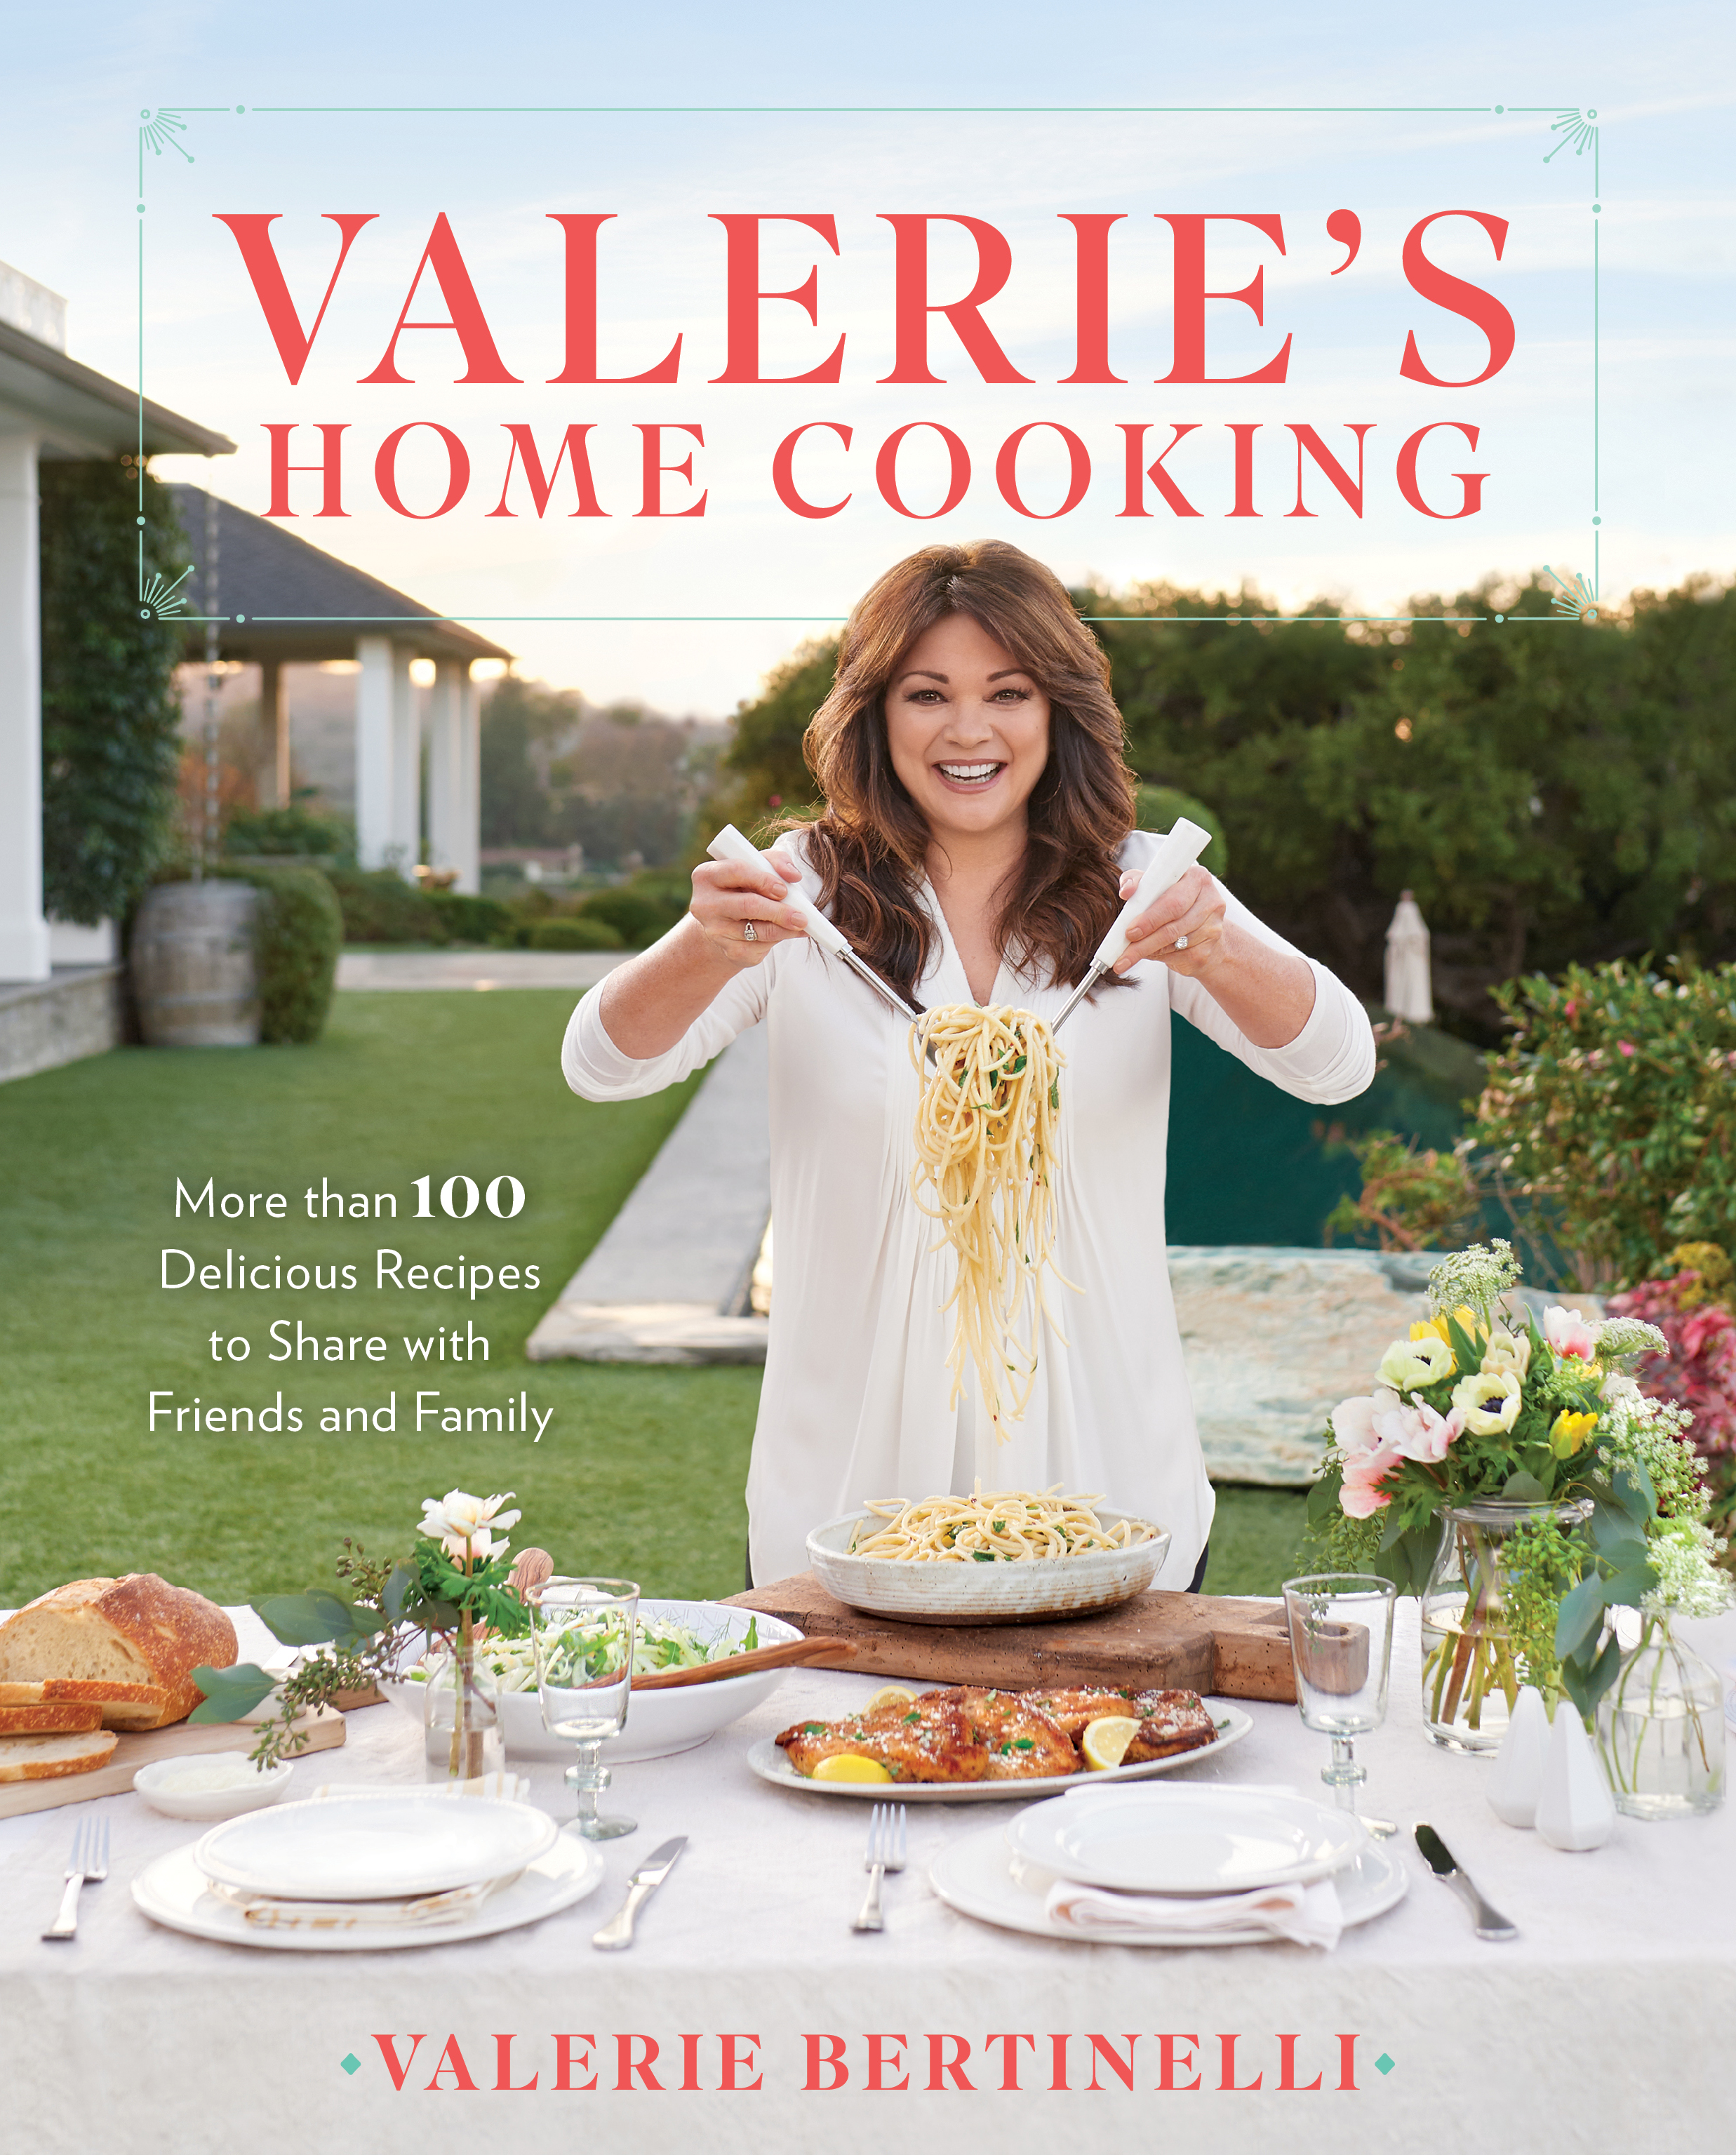 Cooking with Valerie Bertinelli